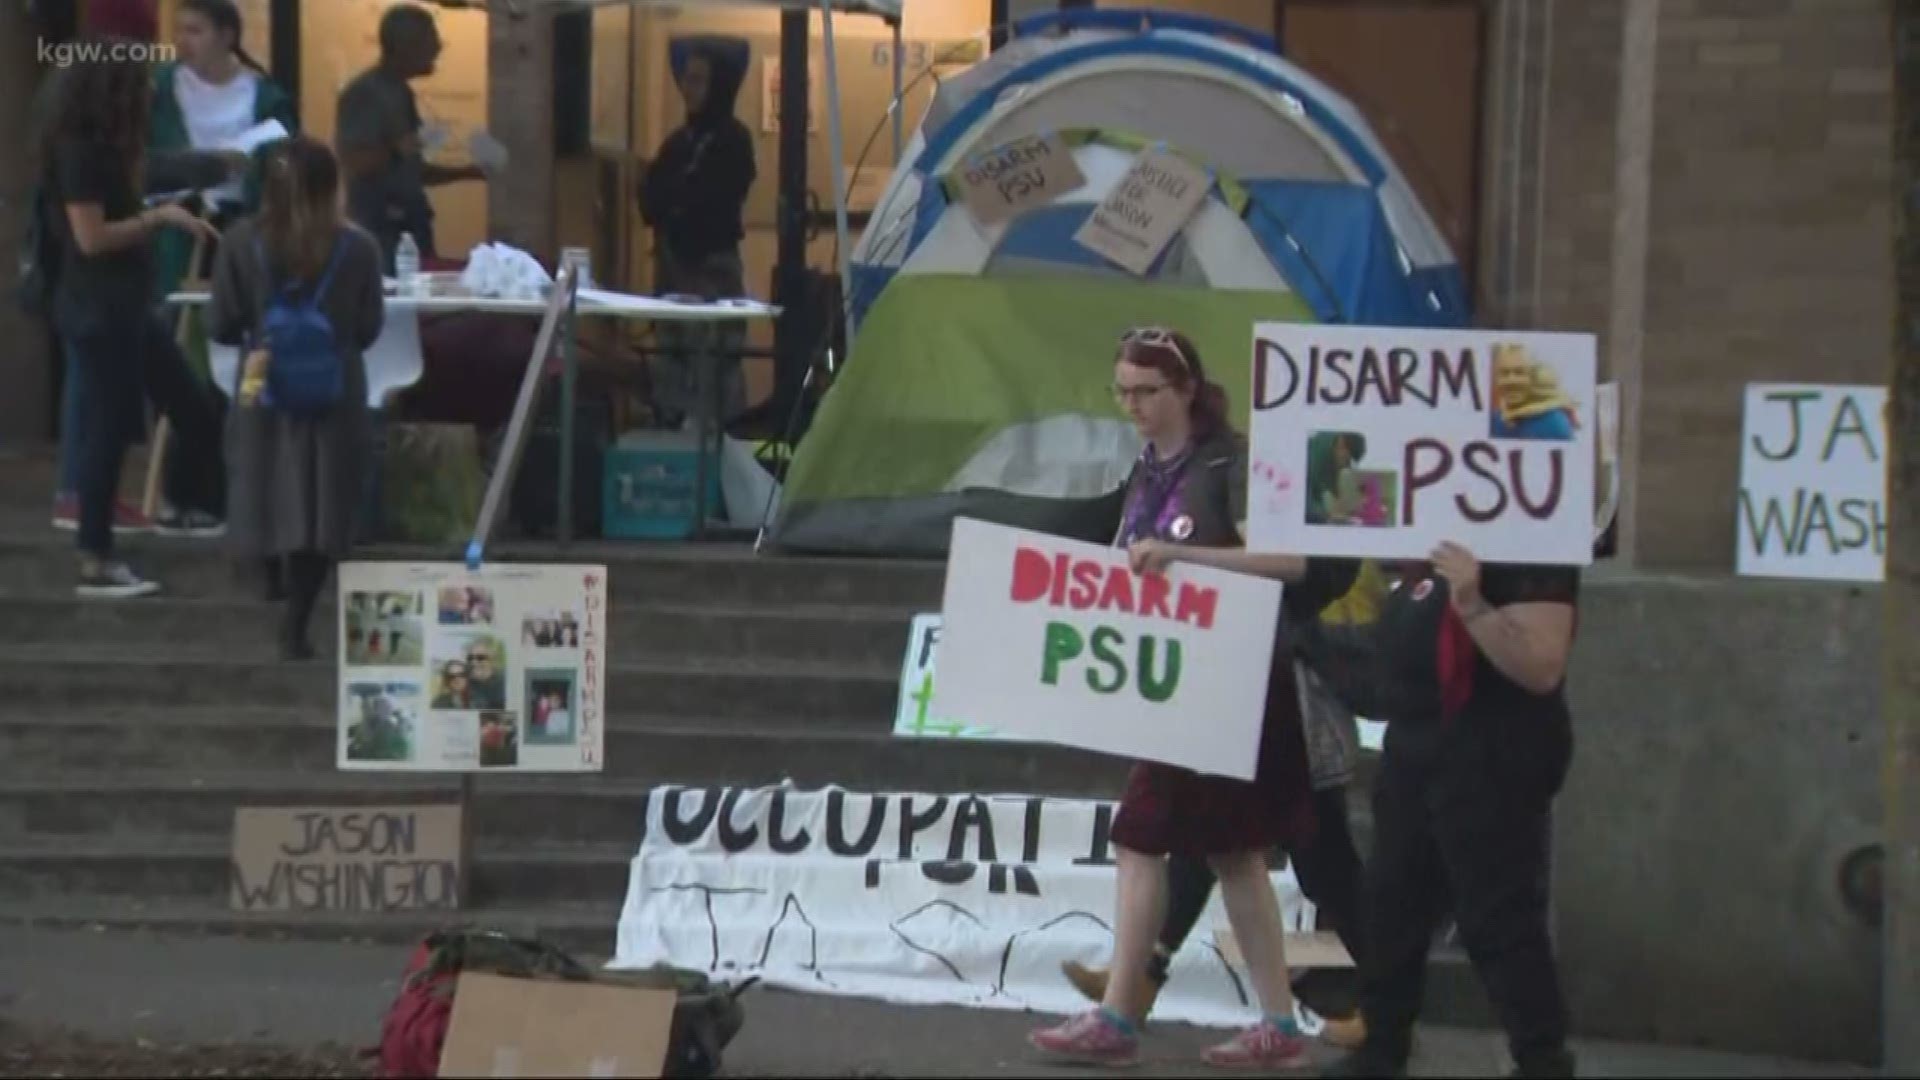 Occupation calls for disarming of PSU officers